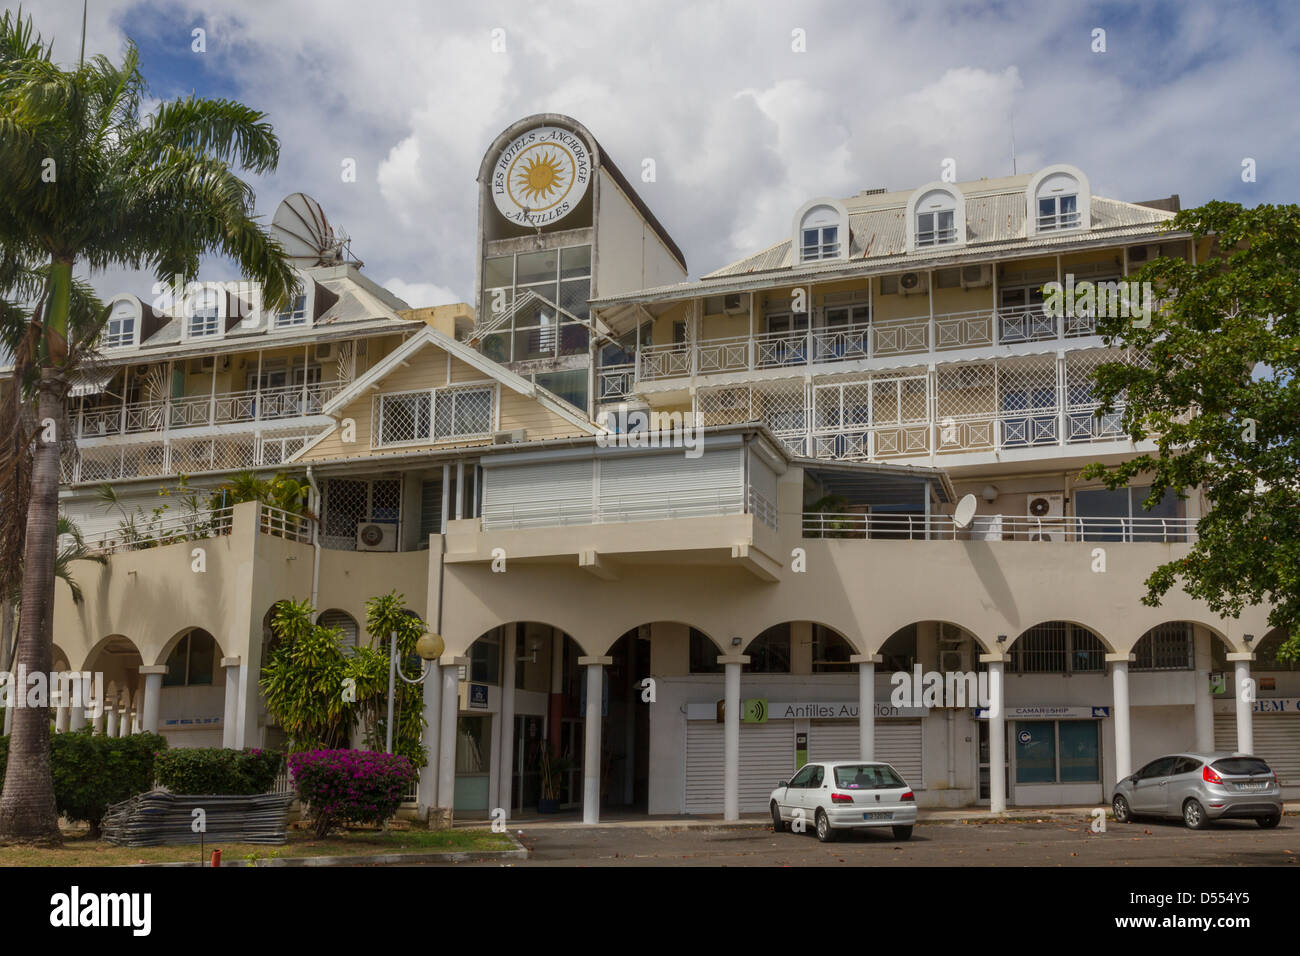 Guadeloupe Pointe-a-Pitre, Anchorage Antilles hotel Stock Photo